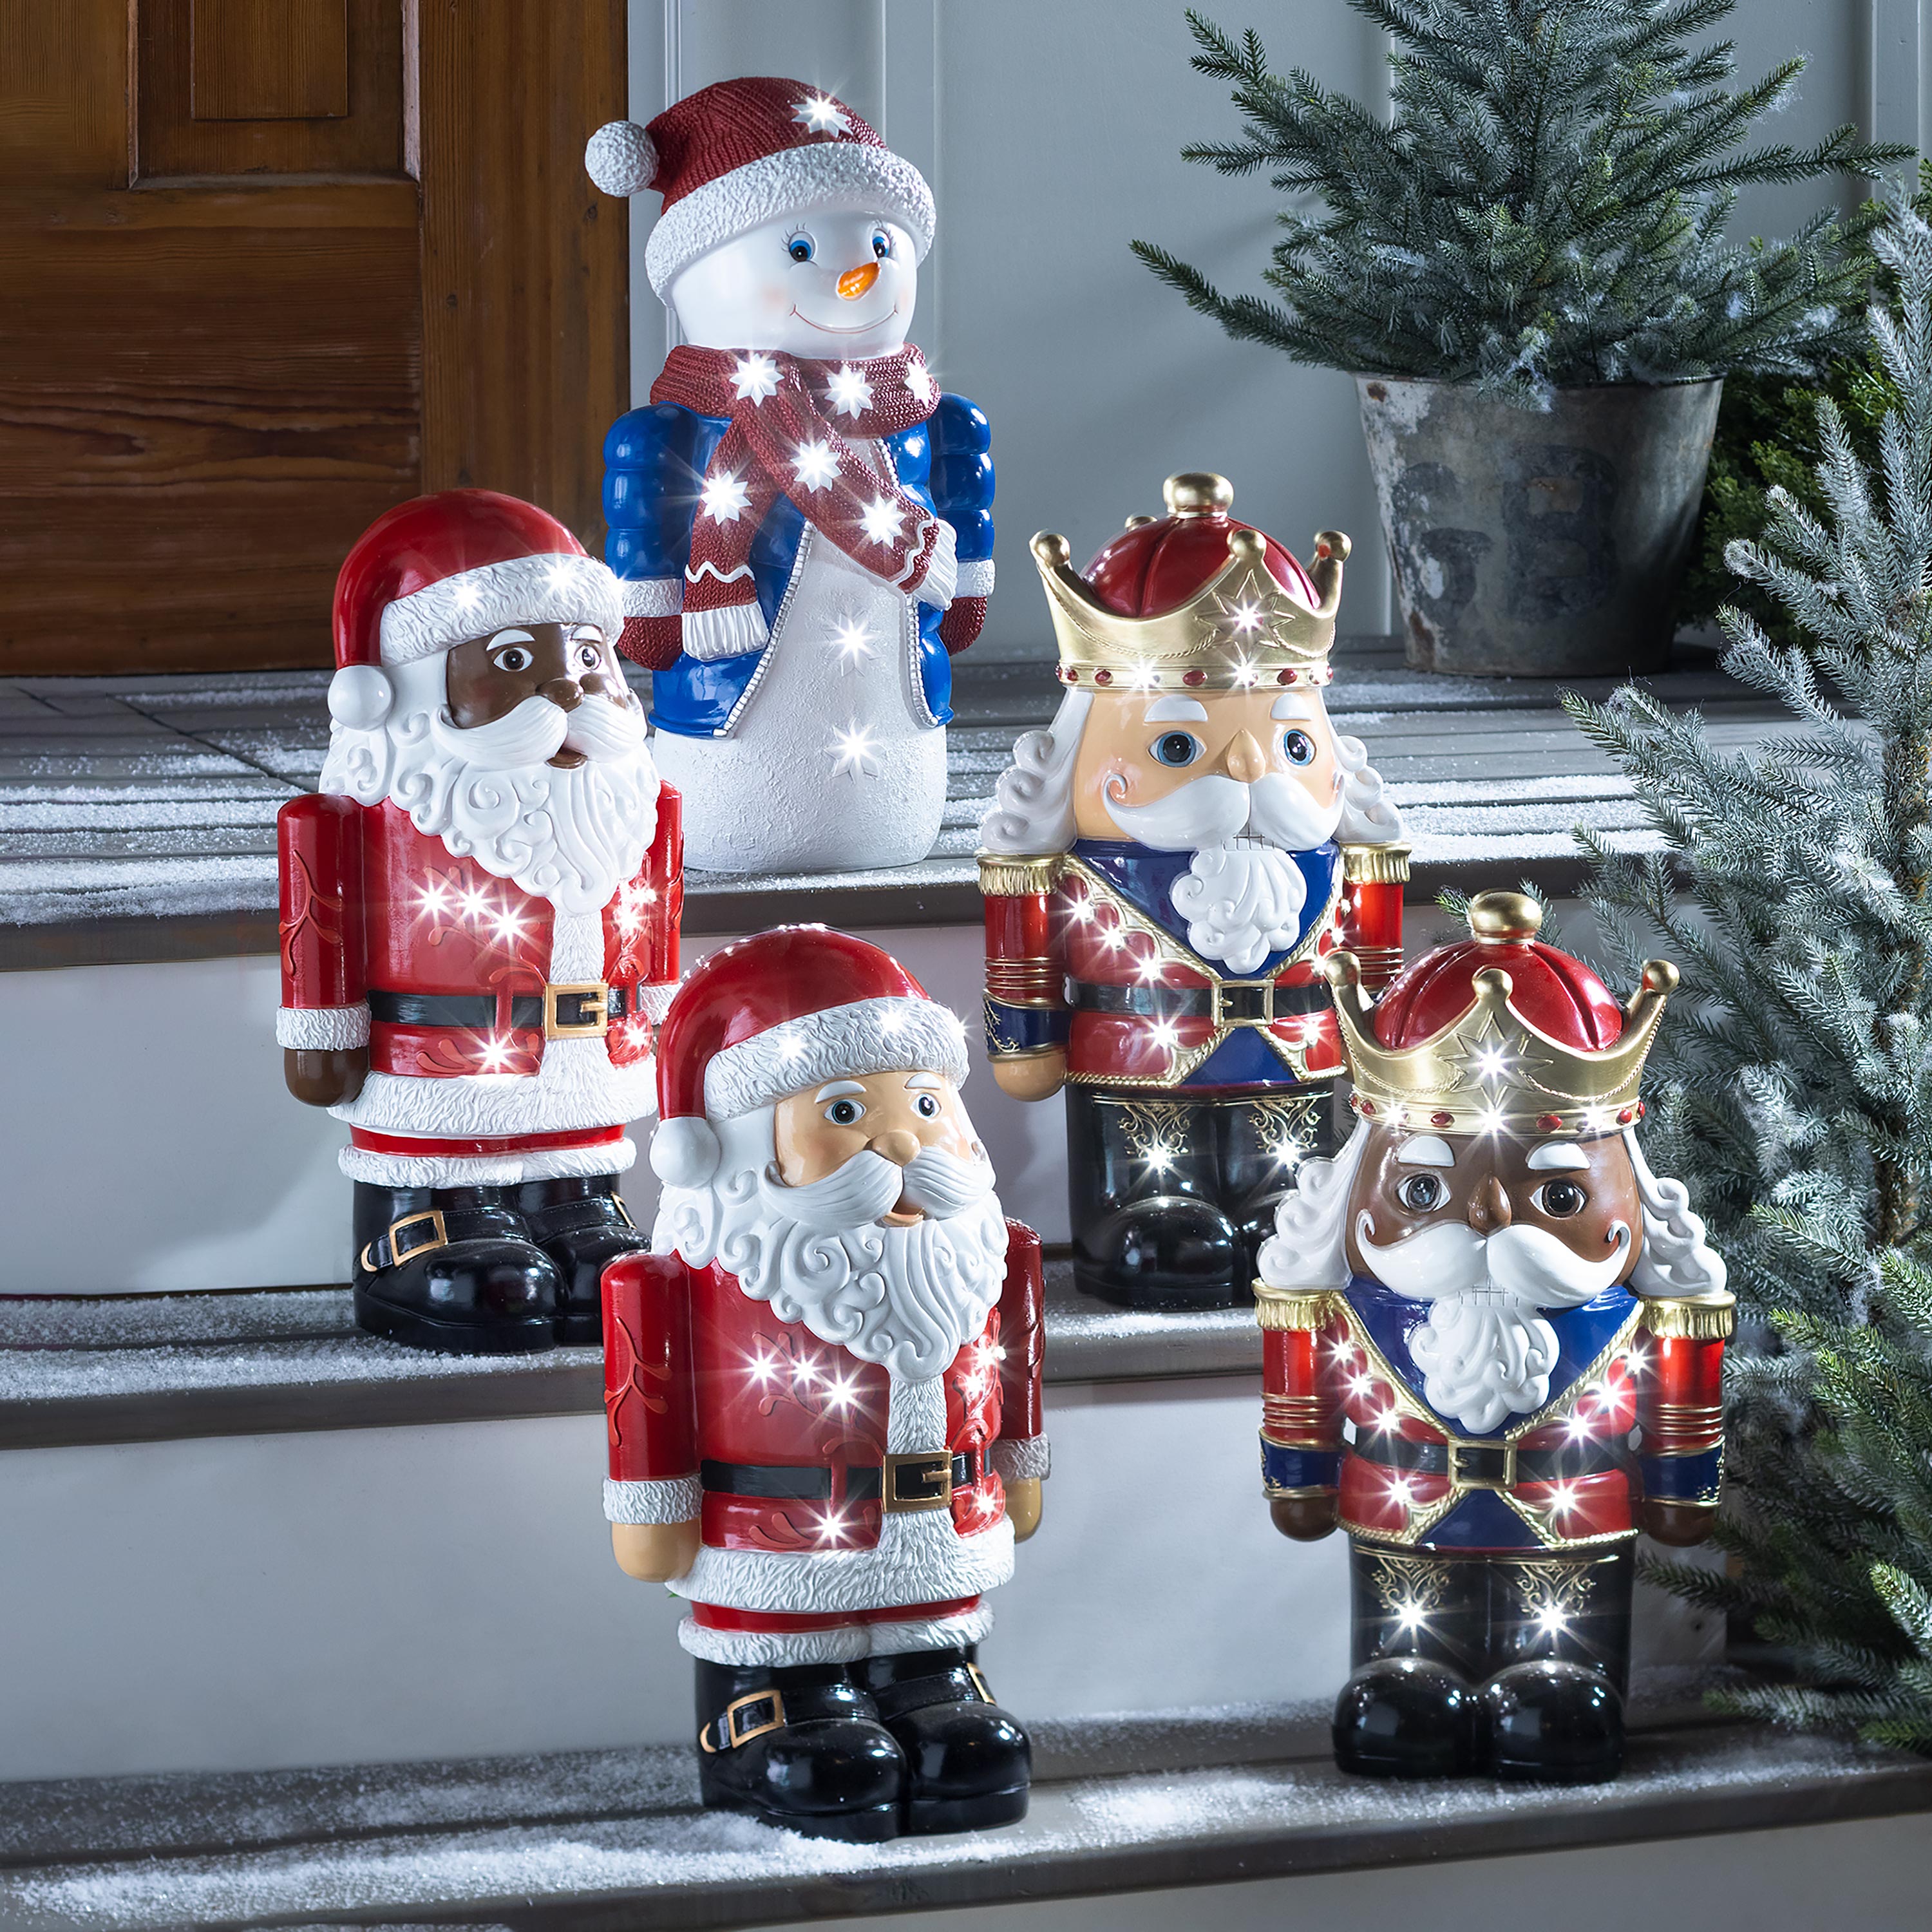 https://www.plowhearth.com/indoor-outdoor-lighted-santa-claus-shorty-statue/p/56566+bk